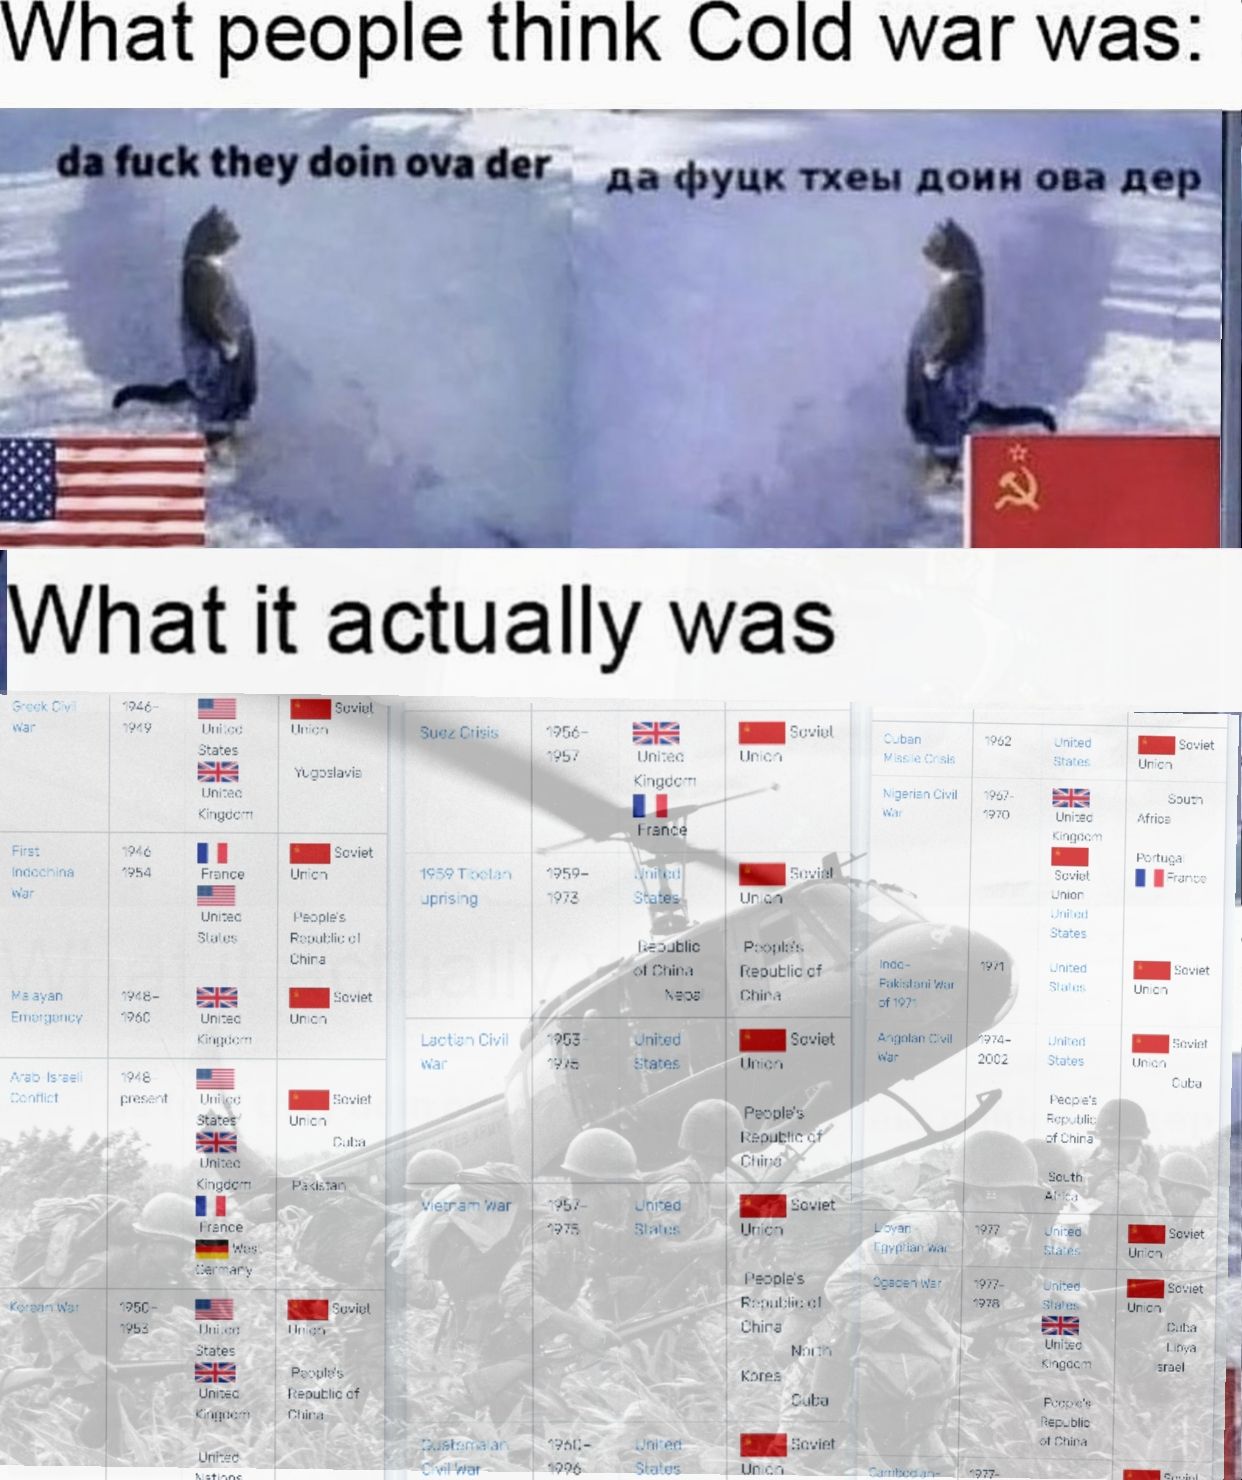 "It was a cold war because nothing happened!"